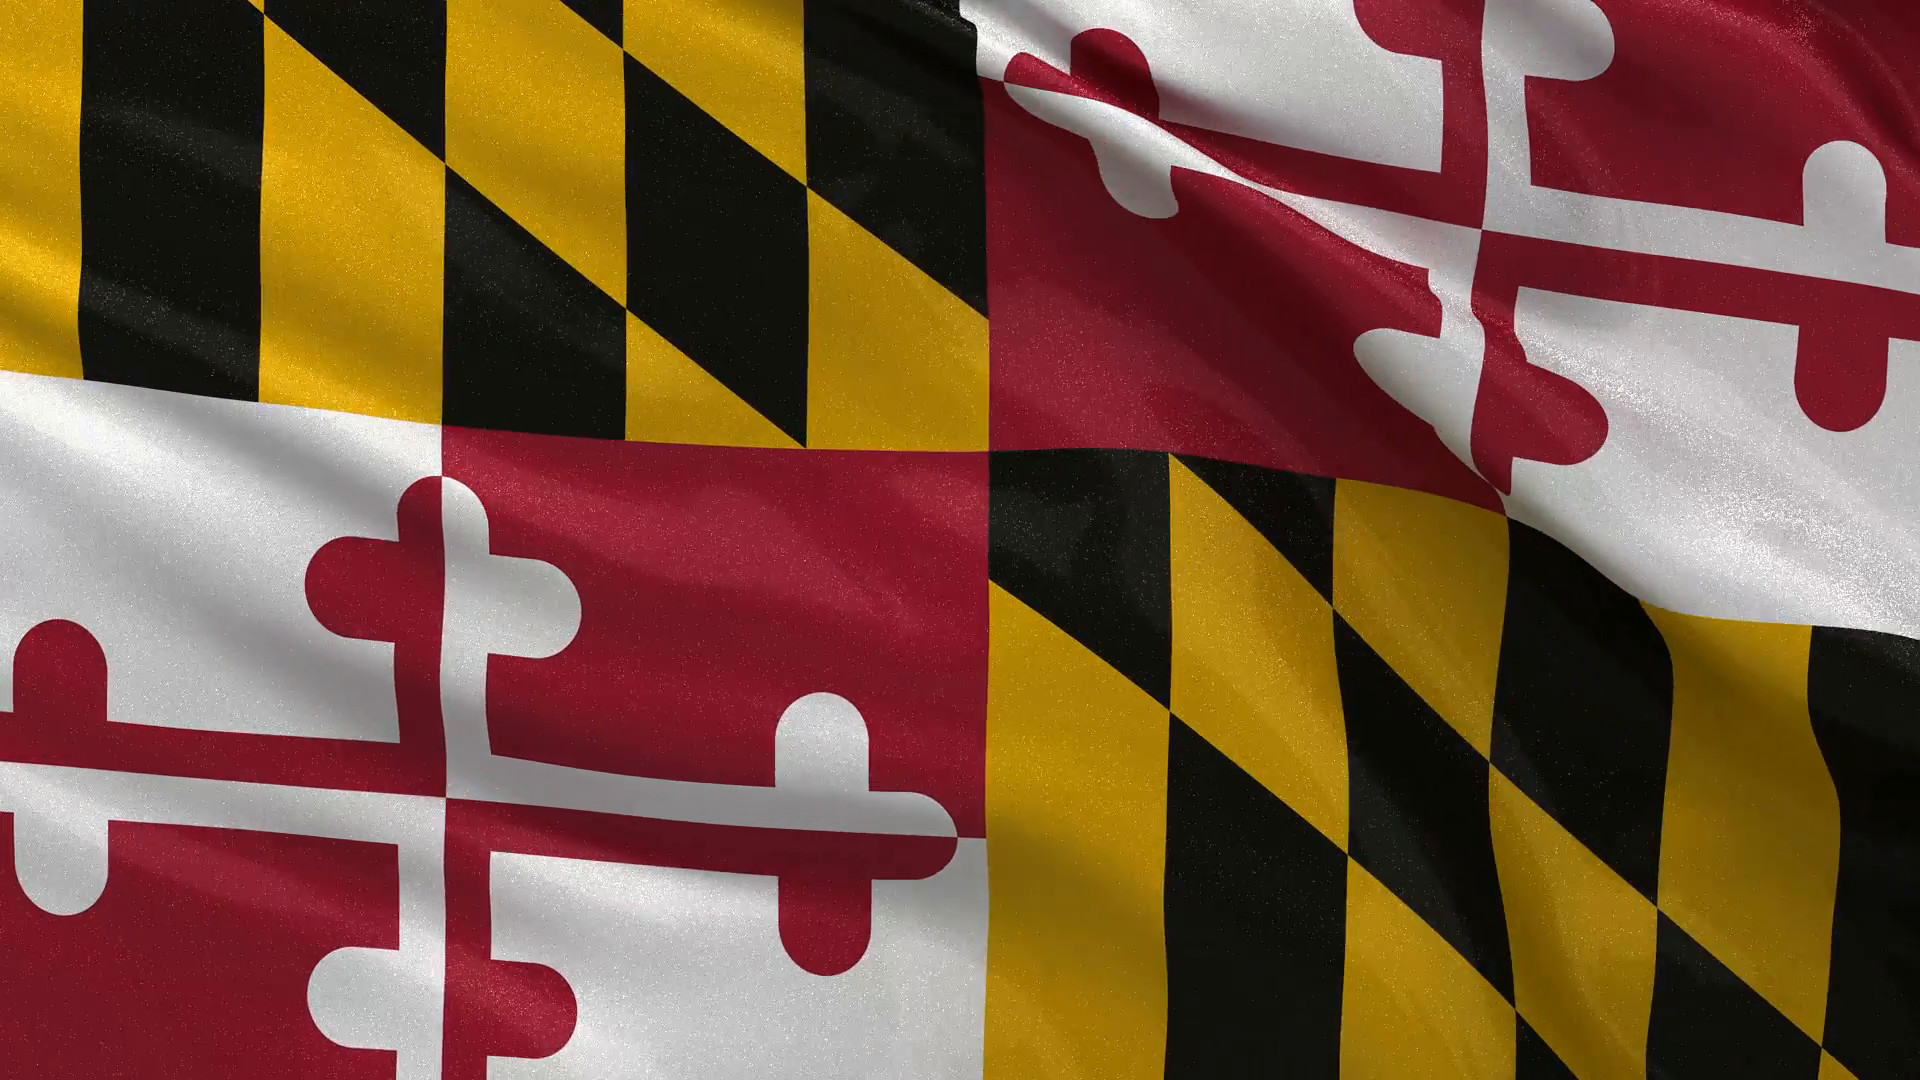 1920x1080, Us State Flag Of Maryland Gently Waving - Maryland State Flag - HD Wallpaper 